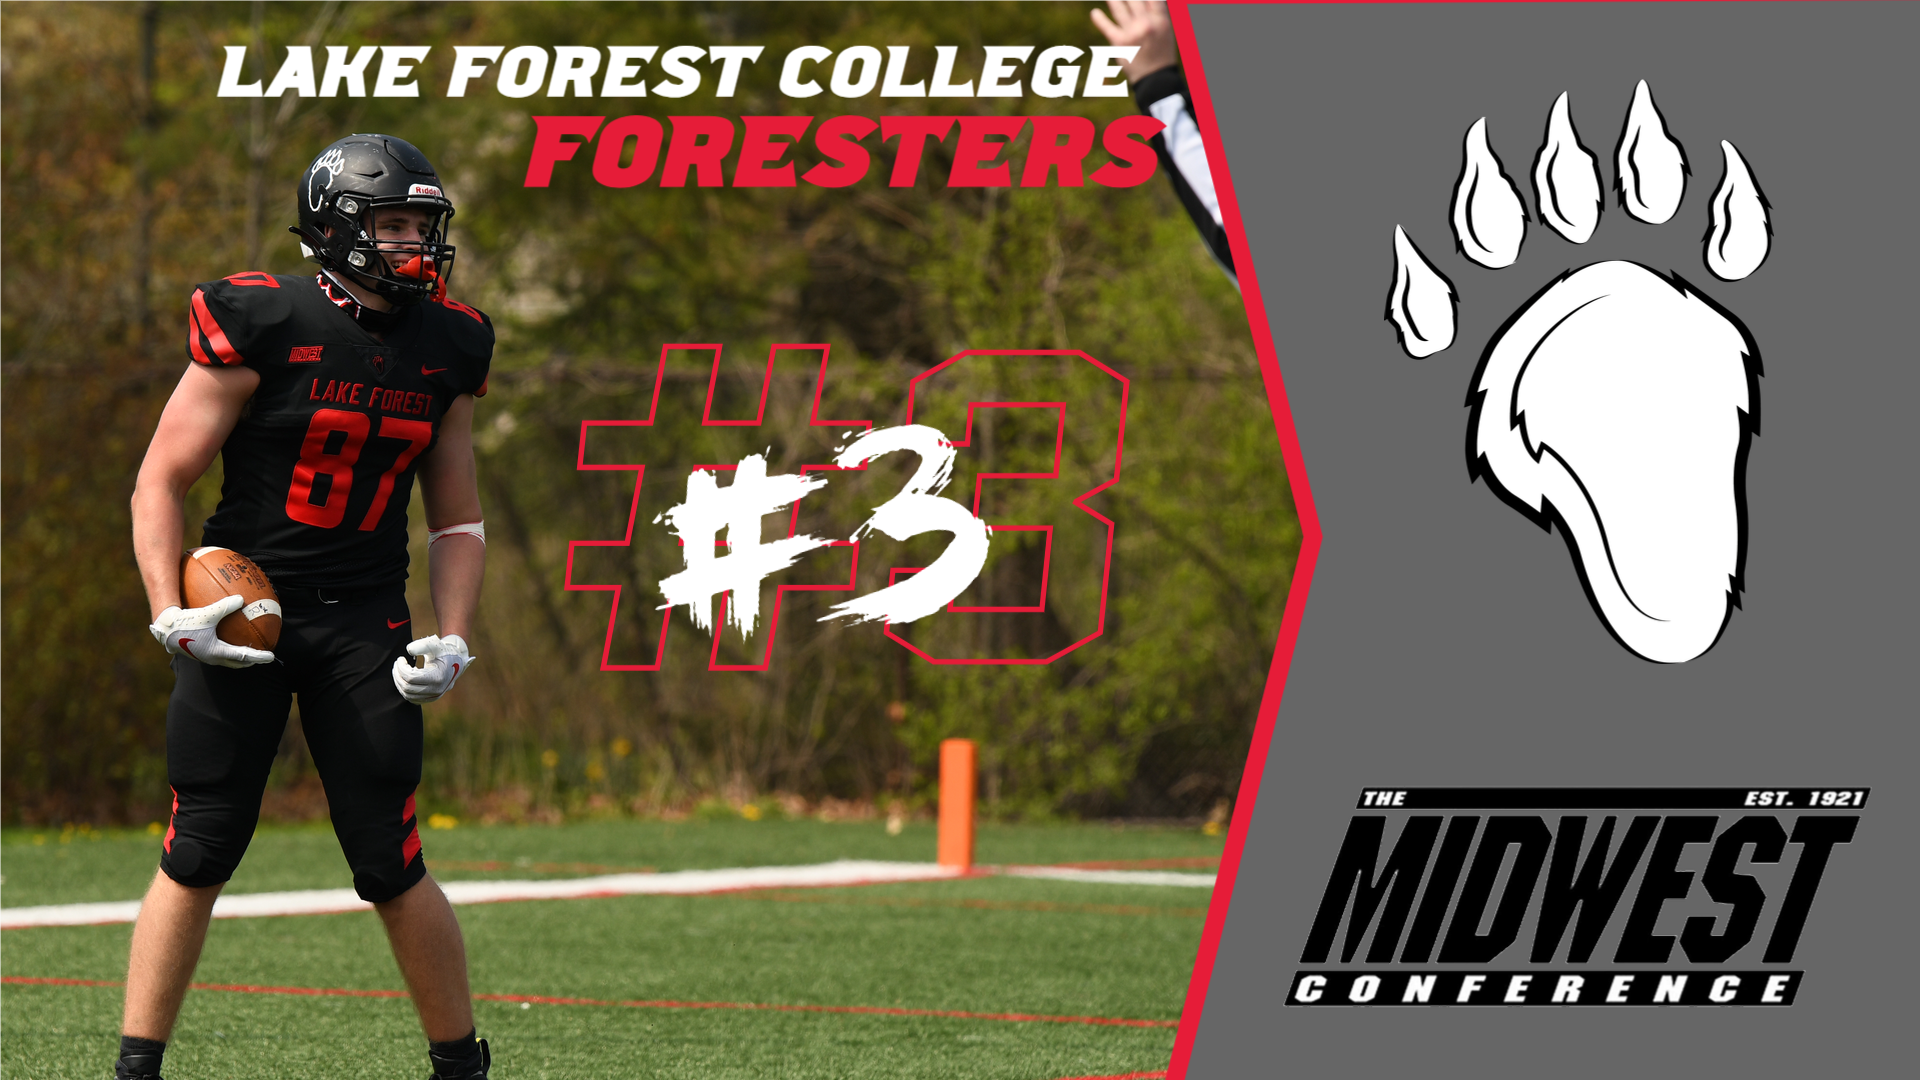 Lake Forest Listed Third in MWC Preseason Coaches Poll